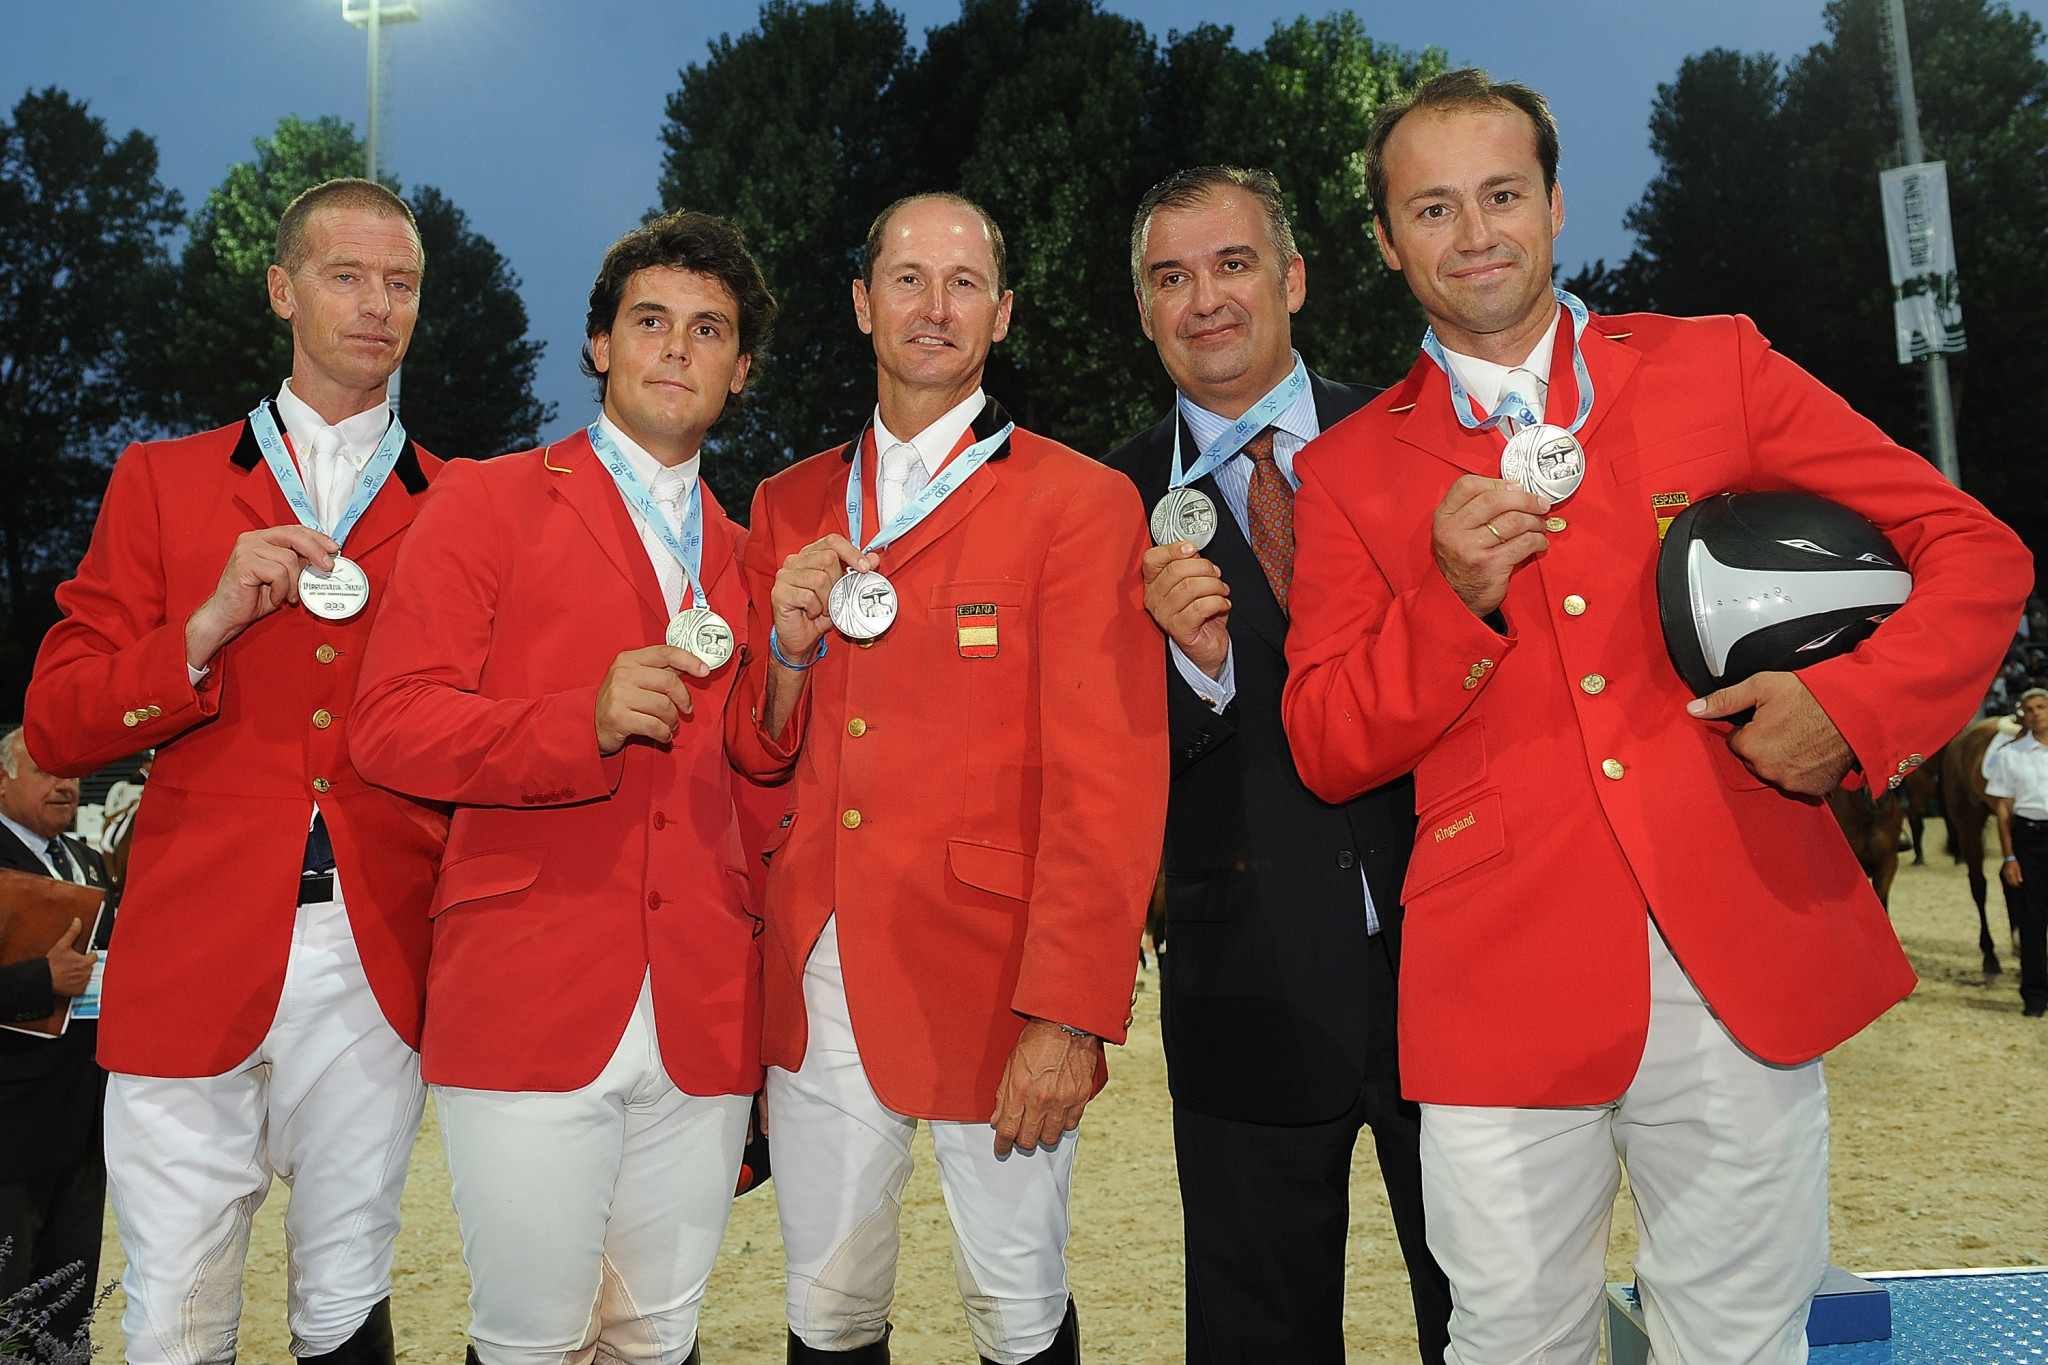 Marco Fuste, in black, joins FEI after 14 years as Spanish jumping team's Chef d’Equipe ©Getty Images